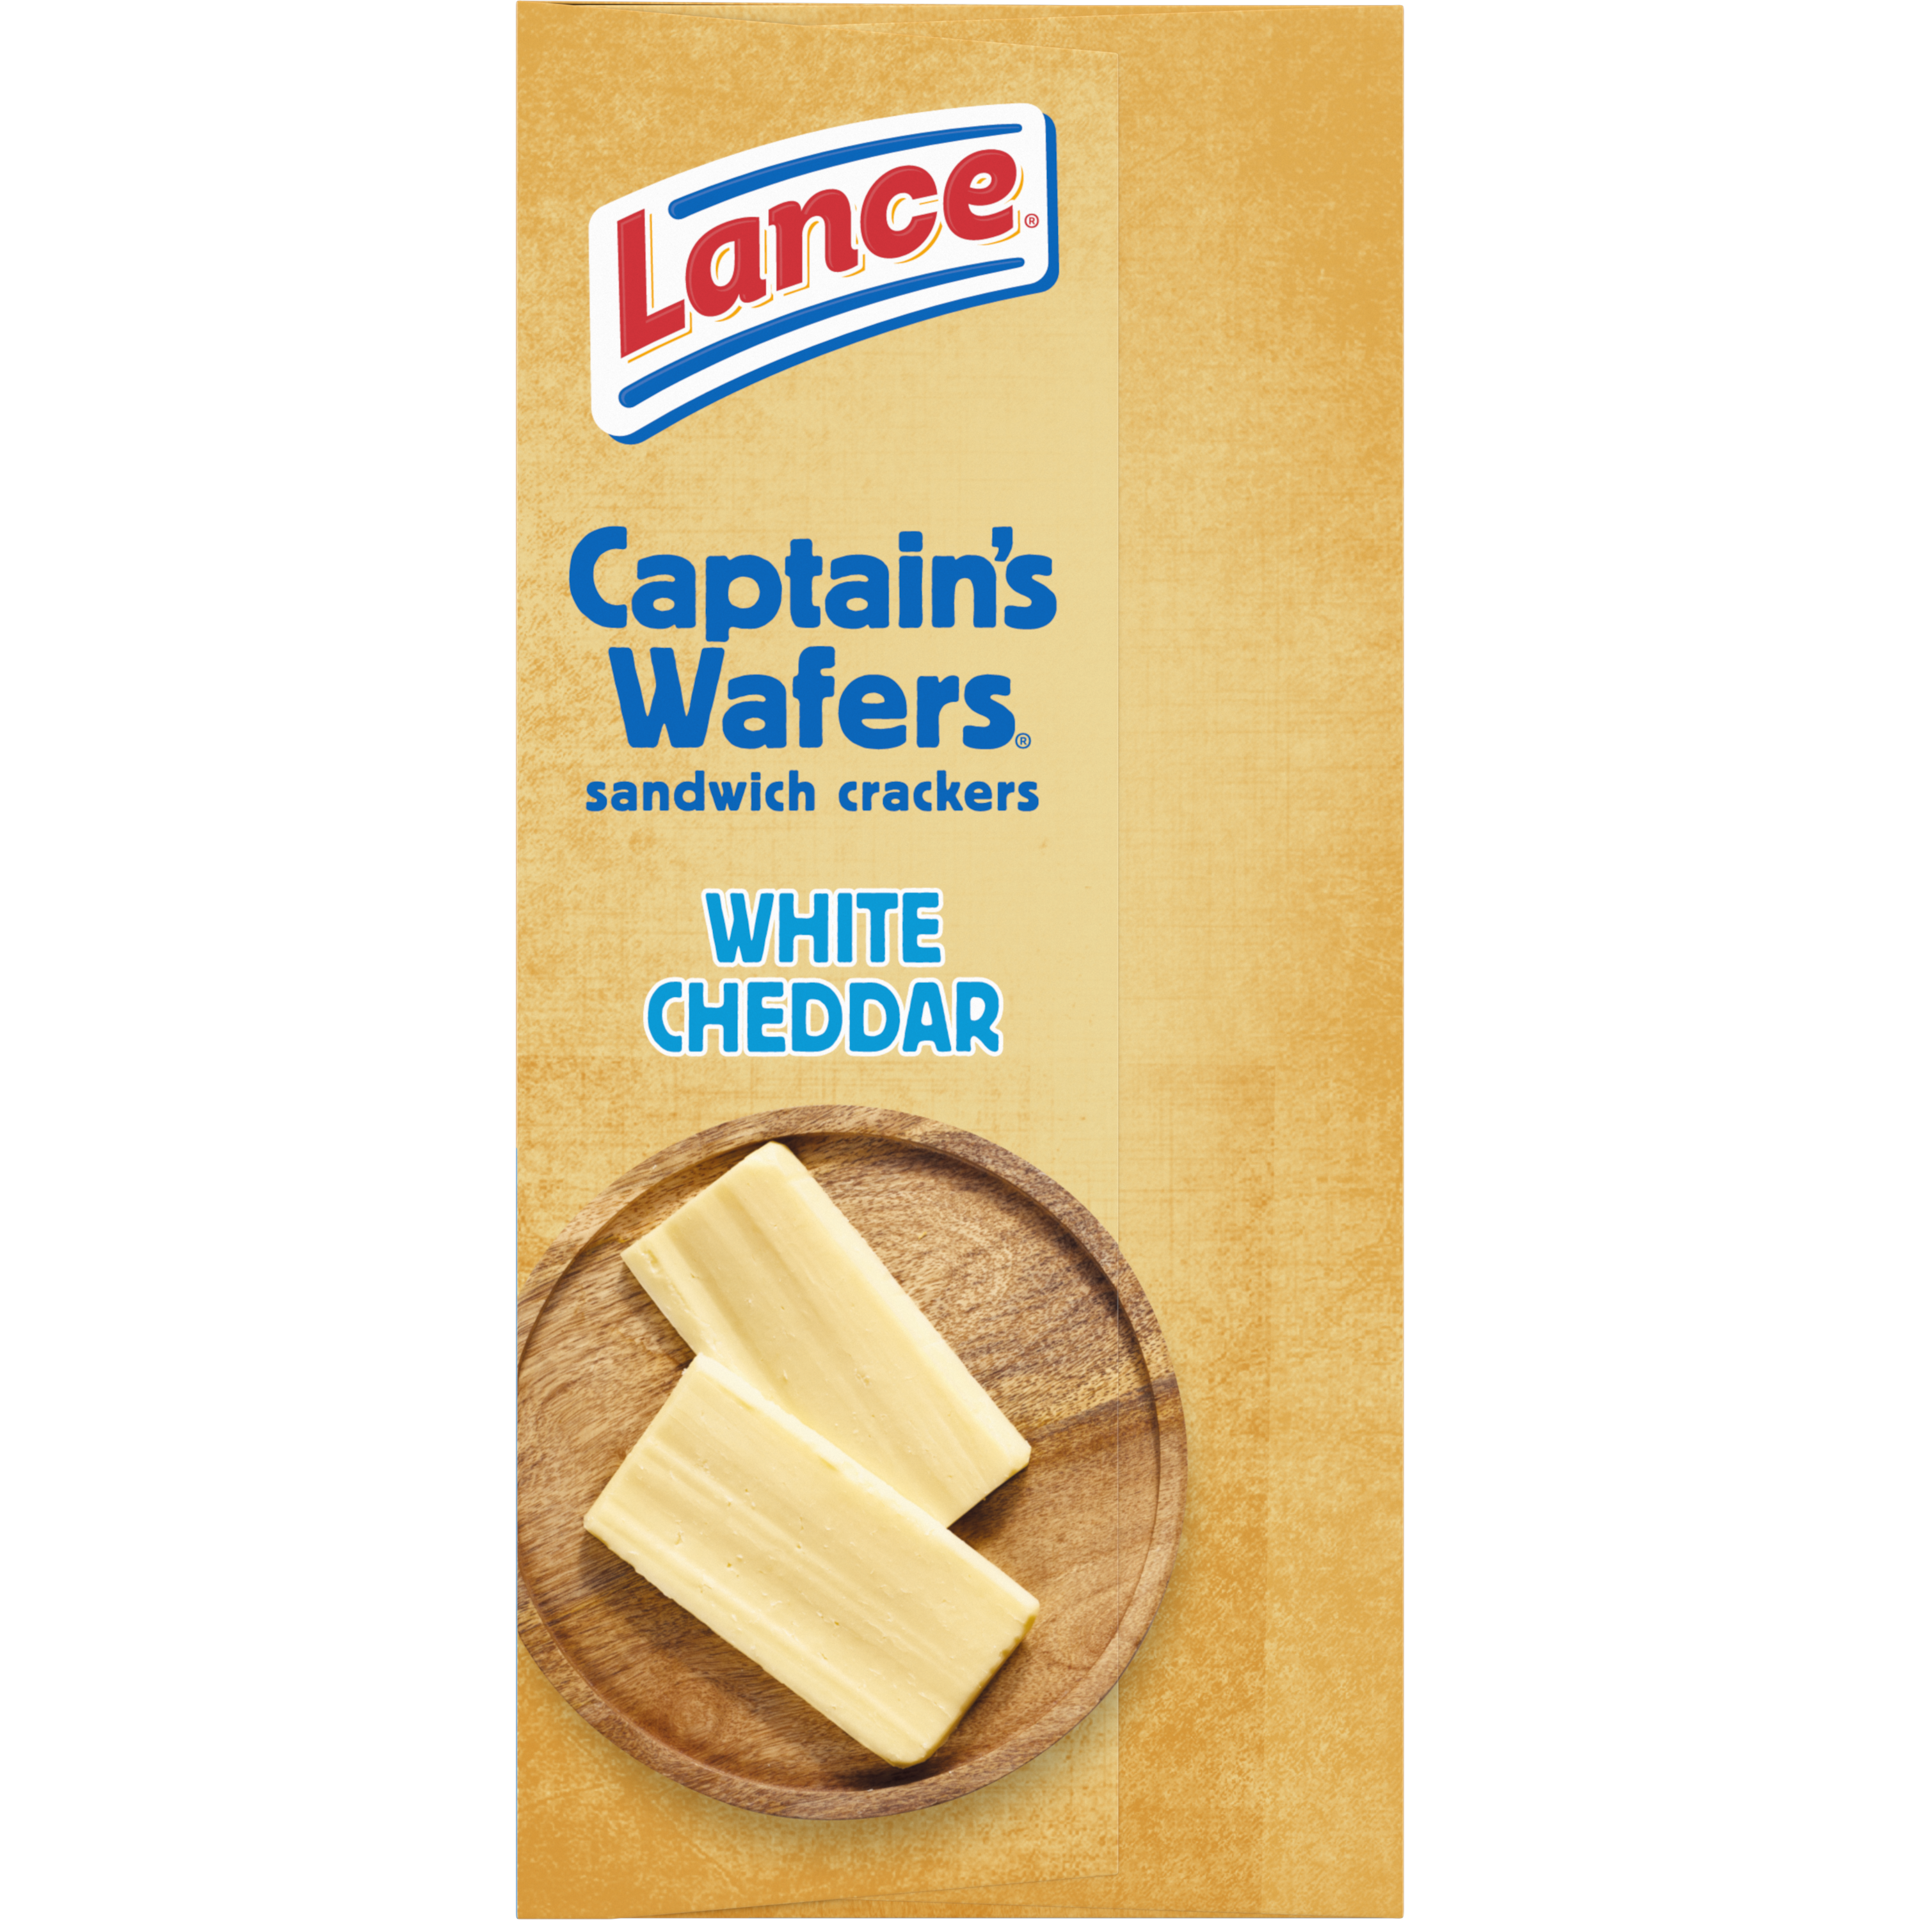 slide 5 of 5, Lance Sandwich Crackers, Captain's Wafers White Cheddar, 6 Packs, 4 Sandwiches Each, 5.5 oz